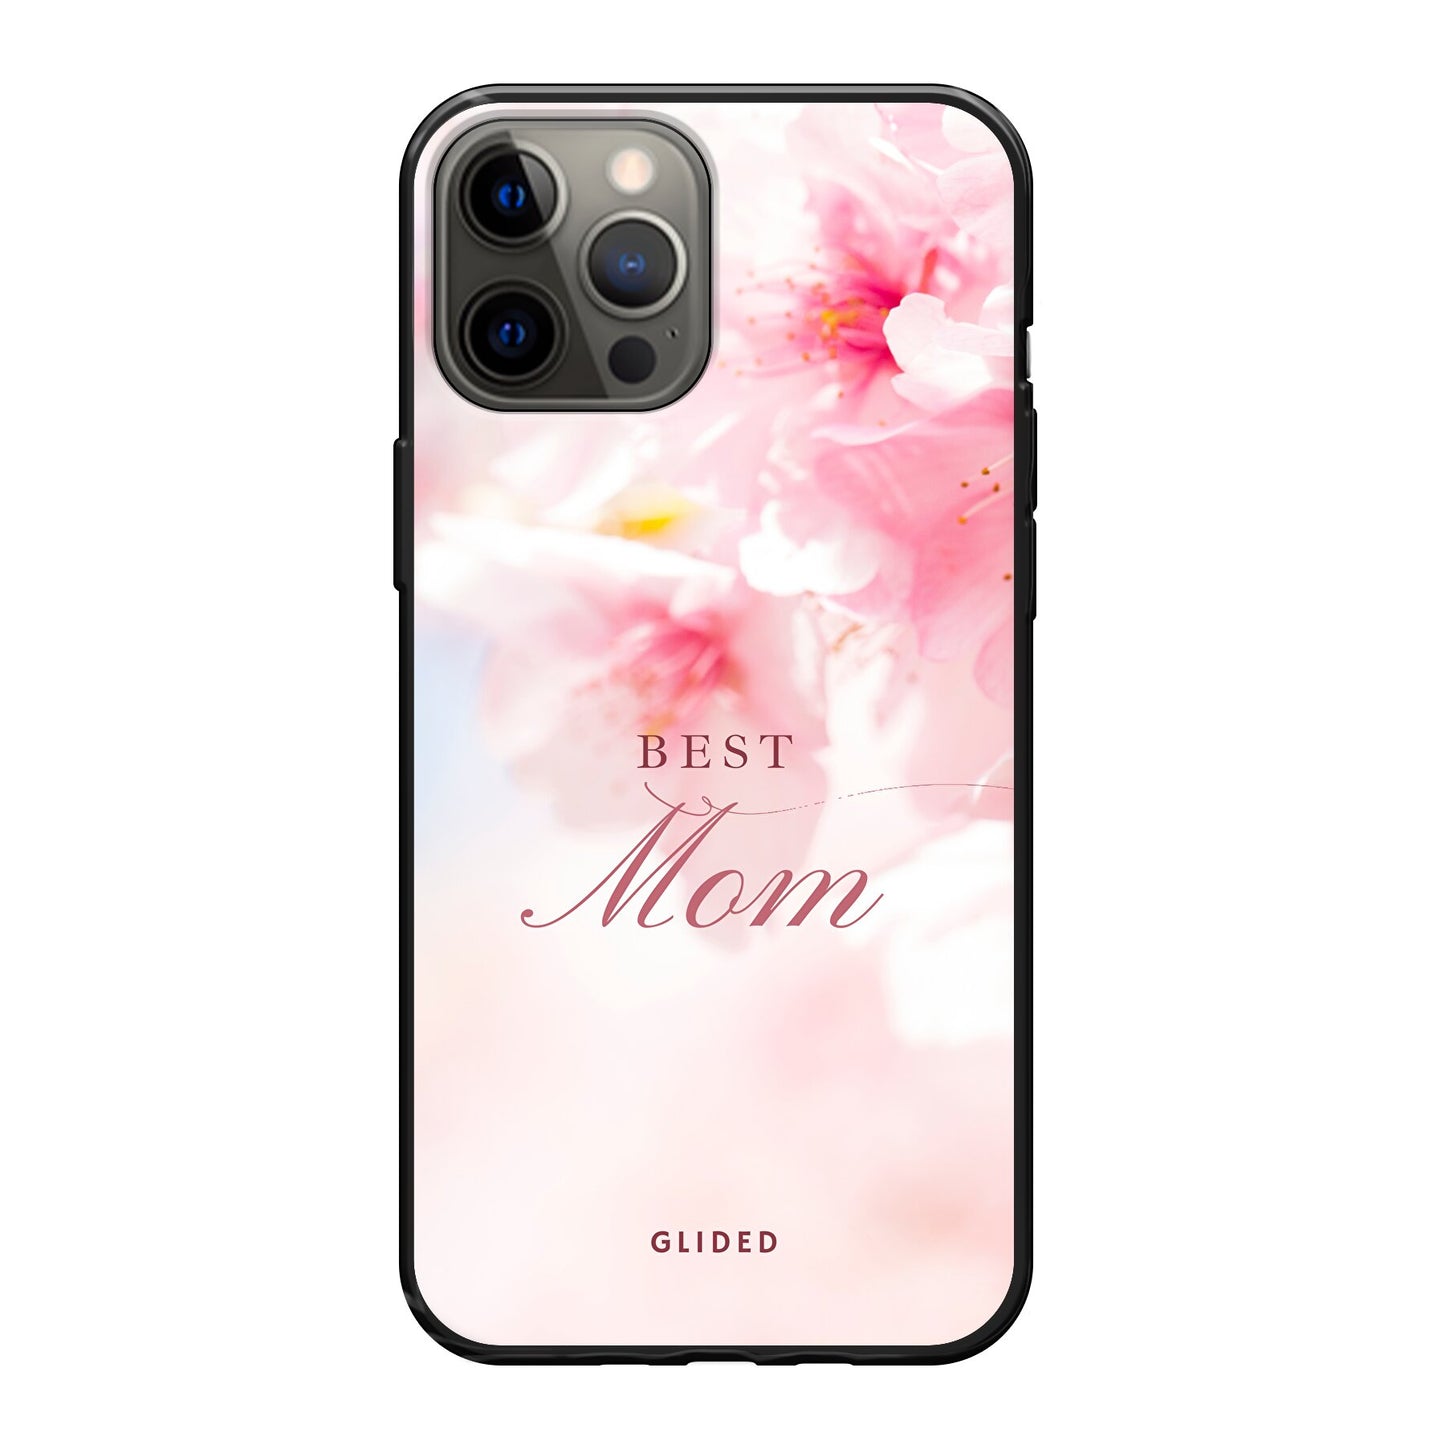 Flower Power - iPhone 12 Pro Max - Soft case